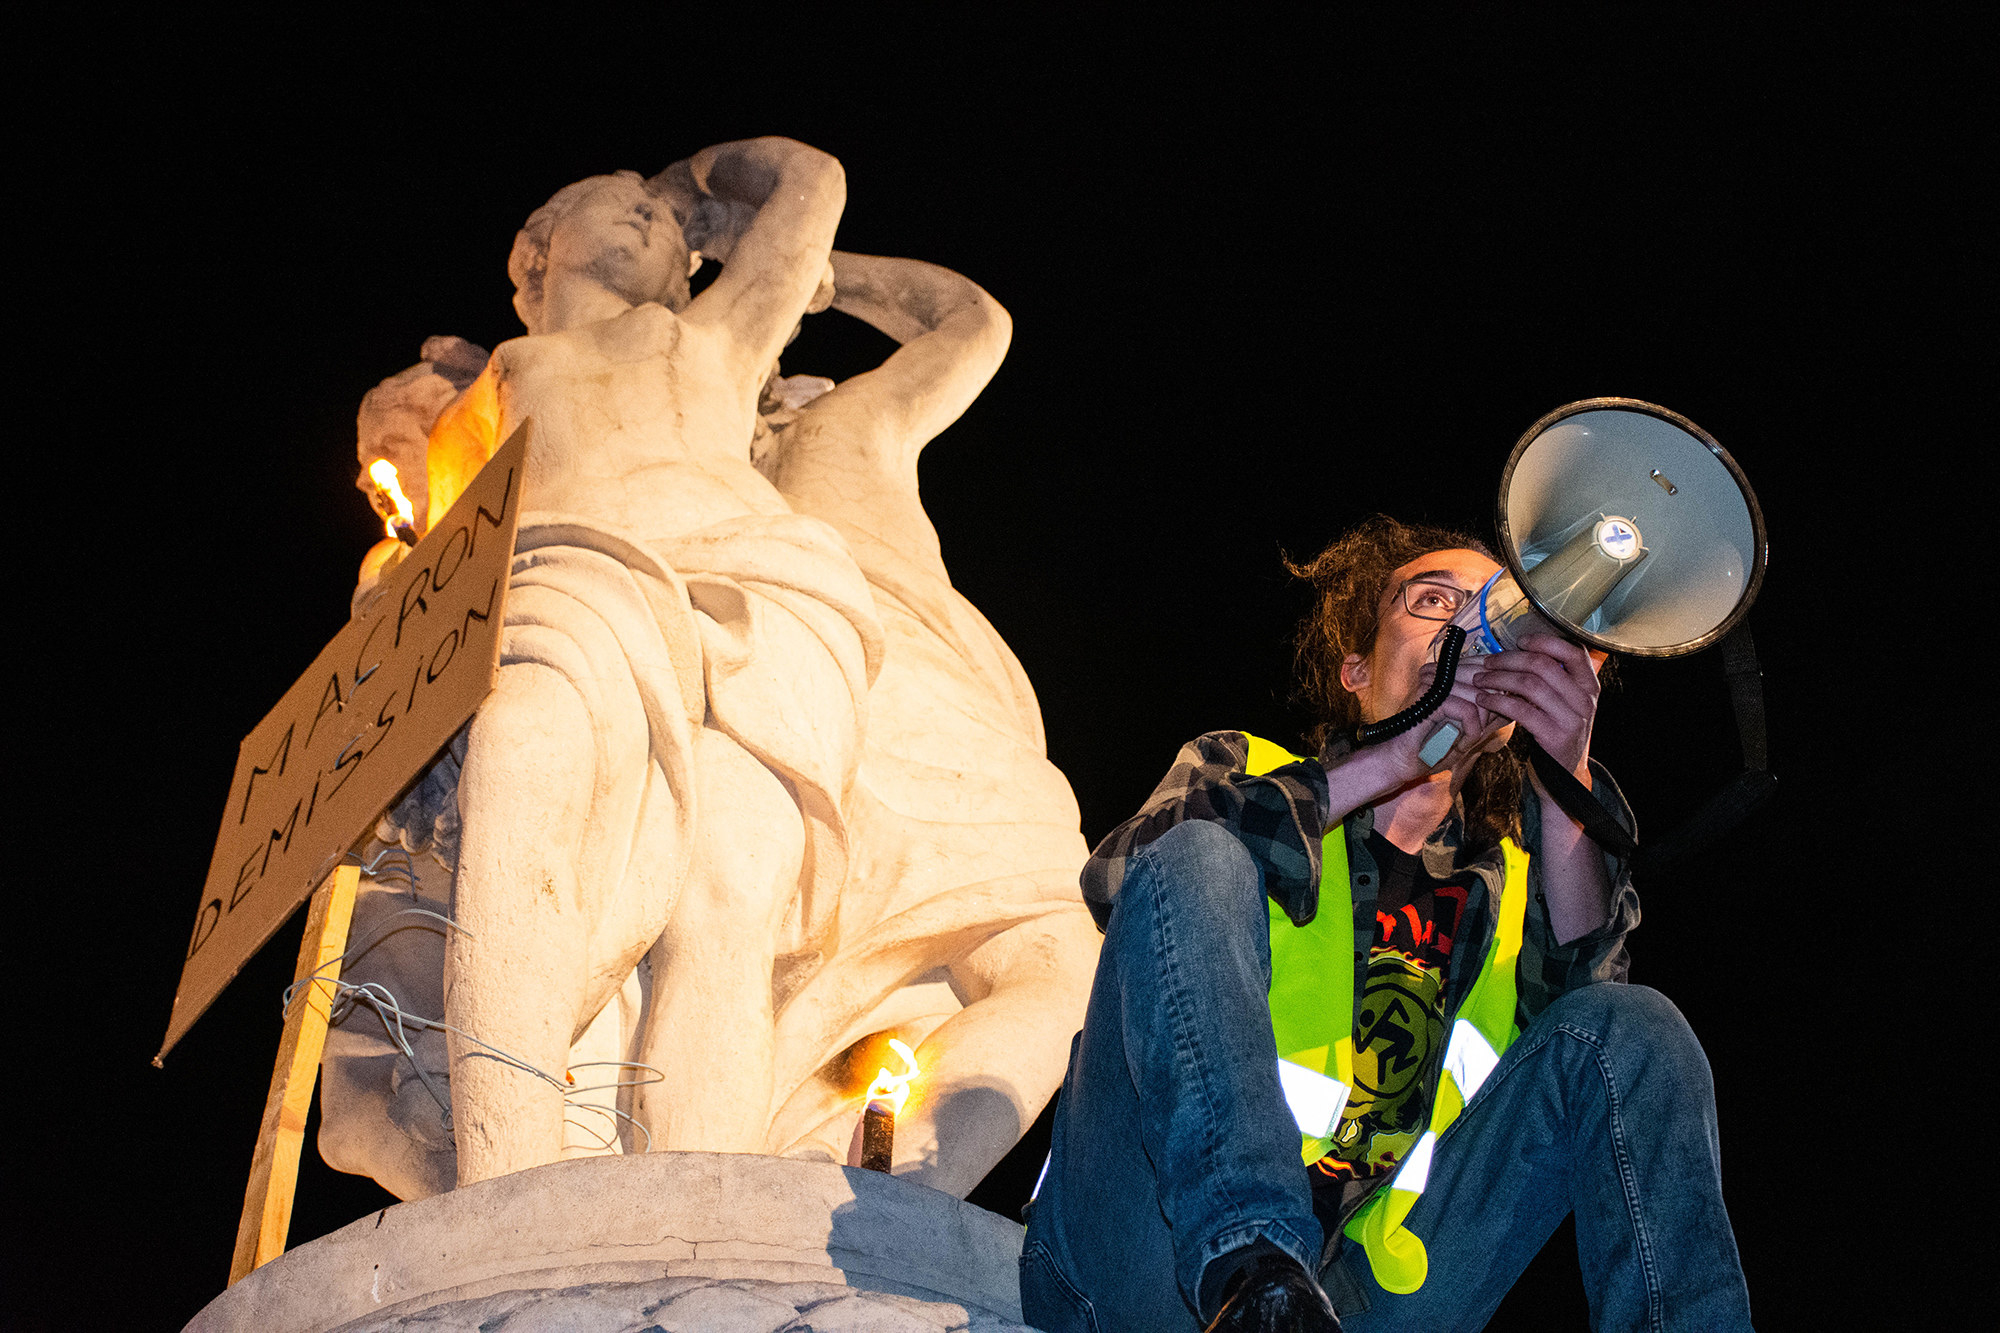 a protester leads the crowd in chants with a bullhorn from the top of a marble statue of three women where a sign says &quot;MACRON DEMISSION&quot; which means &quot;MACRON RESIGN&quot;